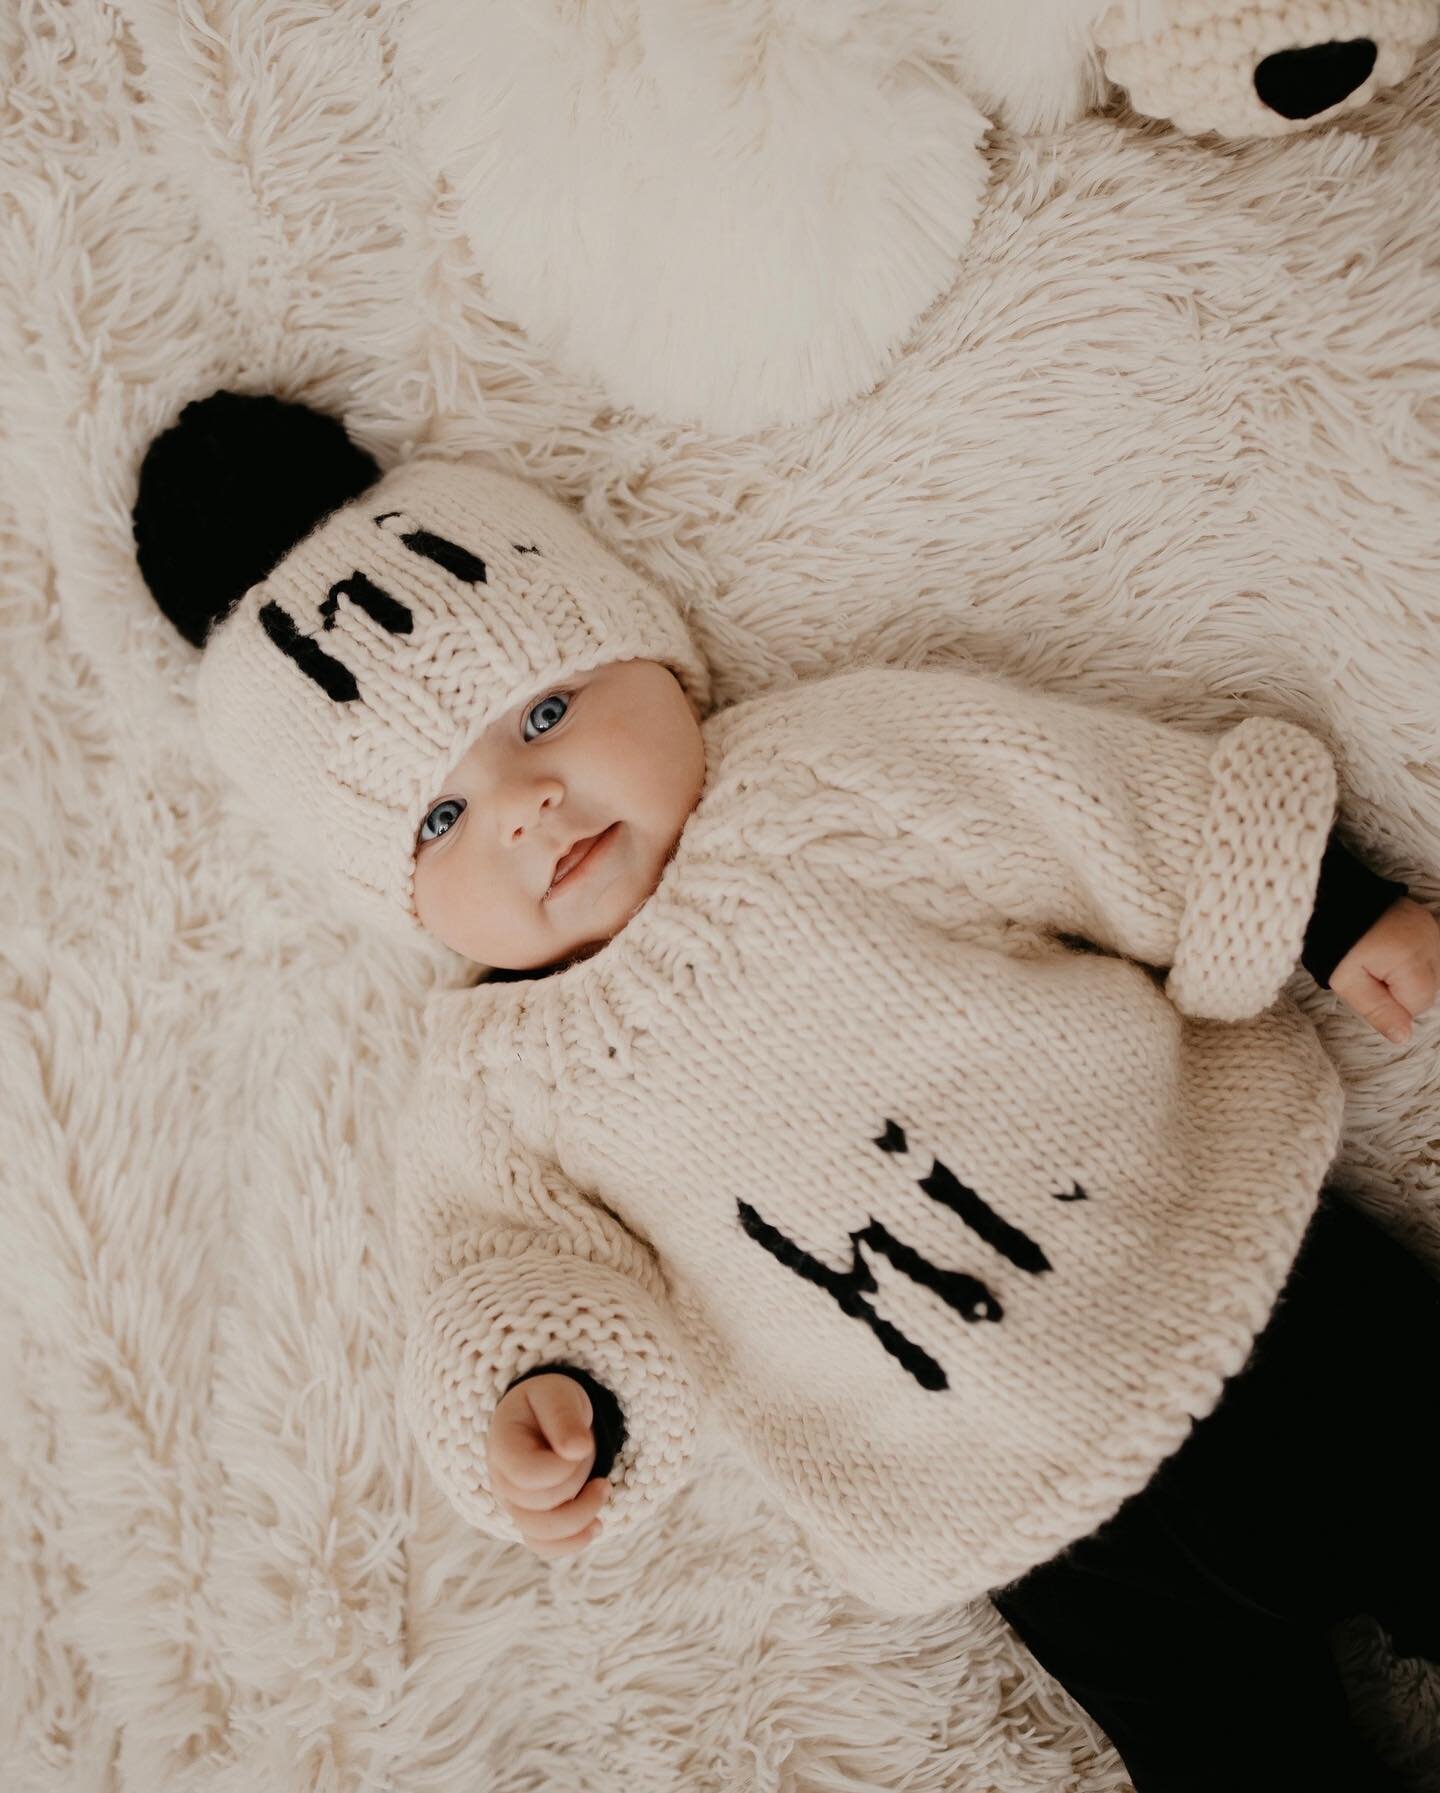 Happy Monday! Have you shopped our Winter Collection yet? This week we are offering 20% off winter collections with a Free Polar Bear Stuffy with purchase*! 
⠀⠀⠀⠀⠀⠀⠀⠀⠀
❄️ With code WINTER20 at checkout! ❄️
⠀⠀⠀⠀⠀⠀⠀⠀⠀
Keep your babies warm and cozy wit